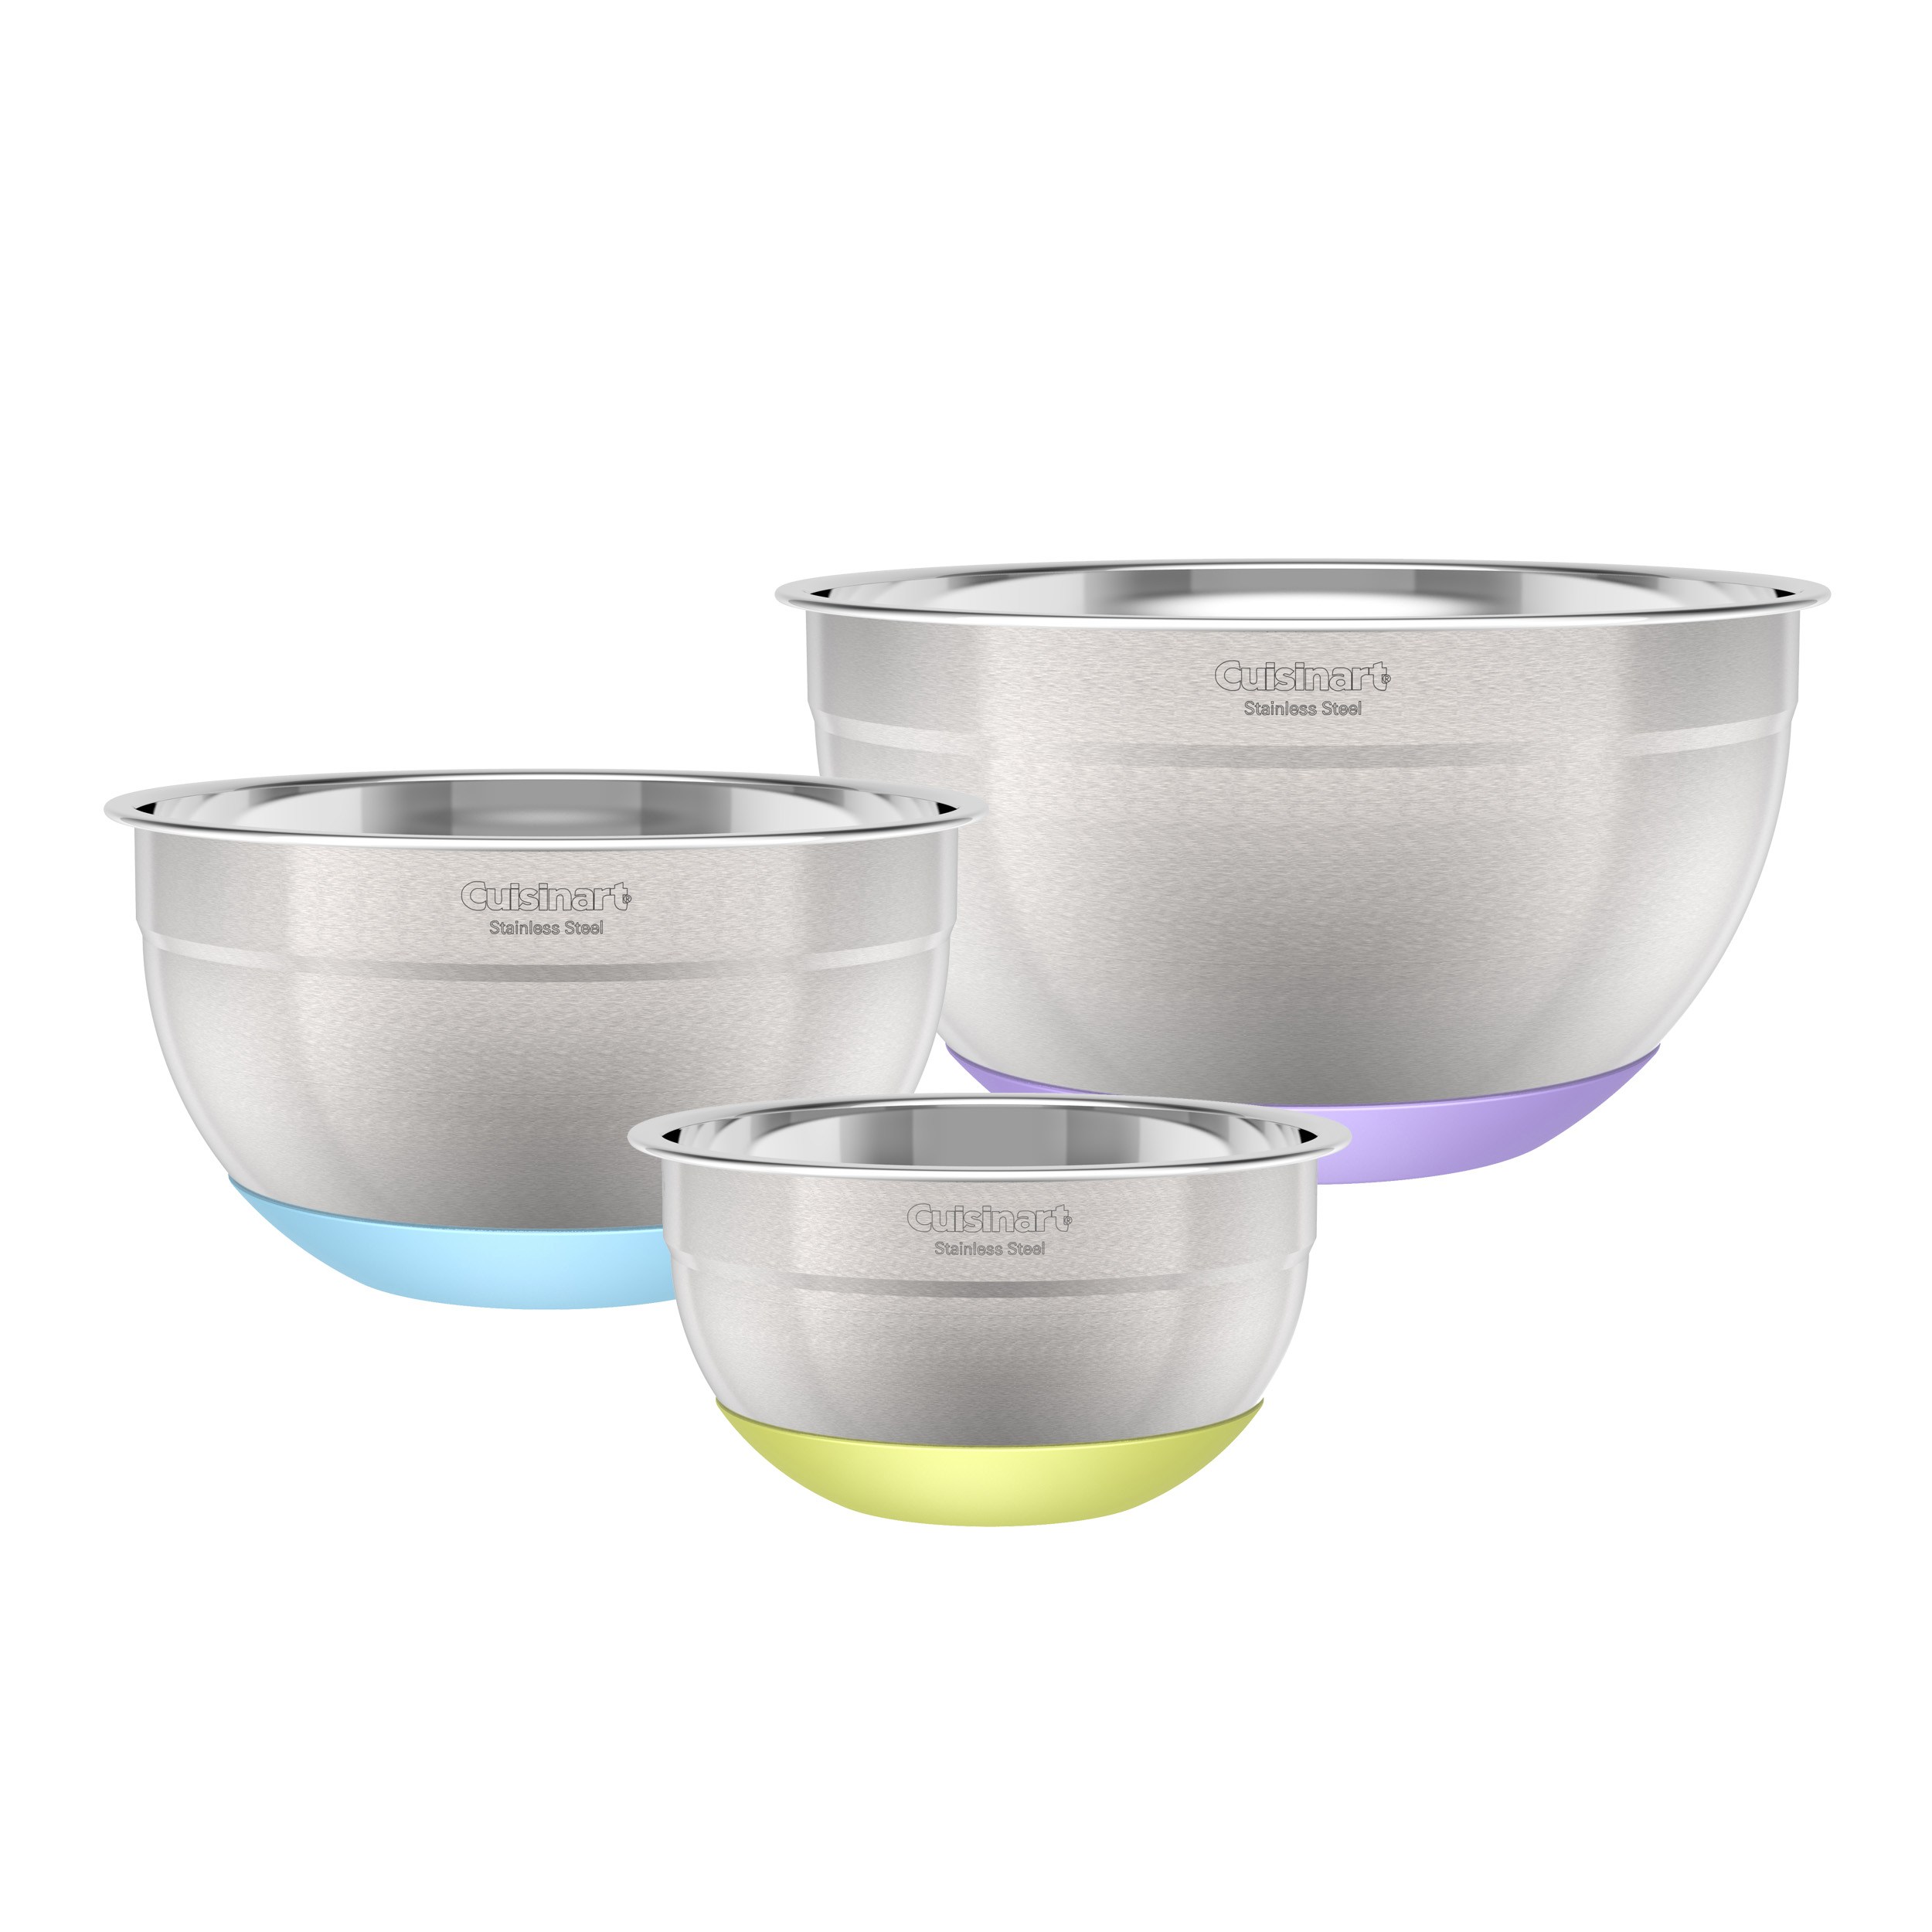 cuisinart stainless steel mixing bowls